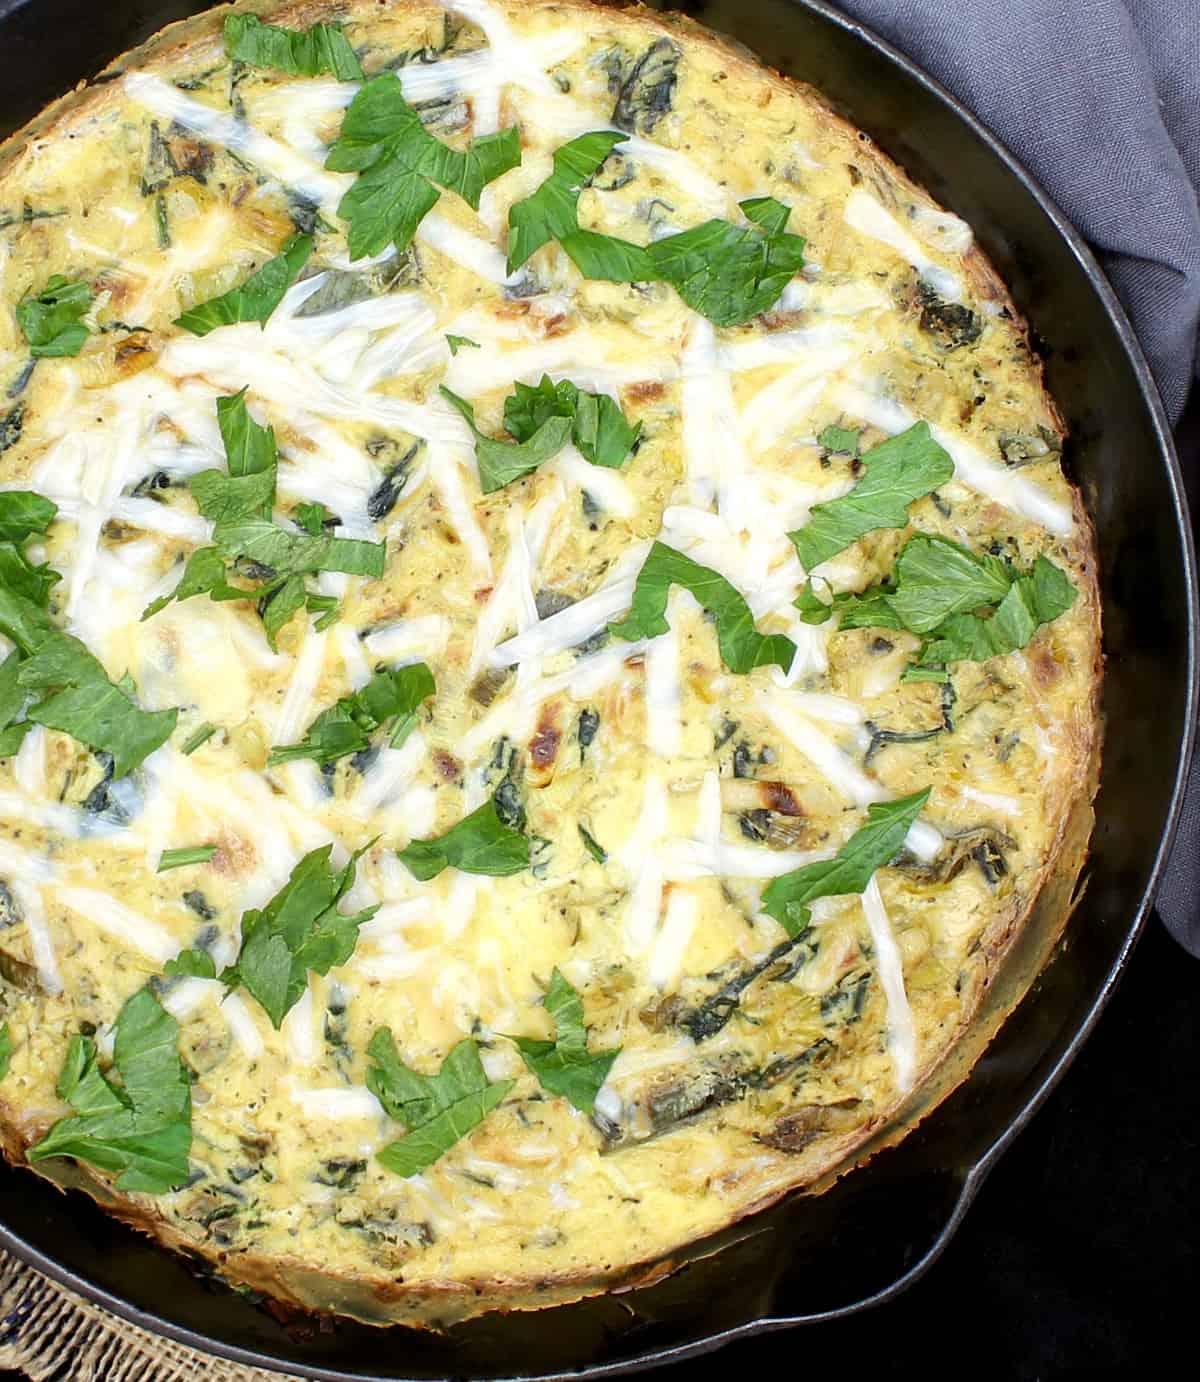 A vegan leek and spinach frittata garnished with vegan mozzarella cheese and parsley in a black cast iron skillet with a gray napkin.